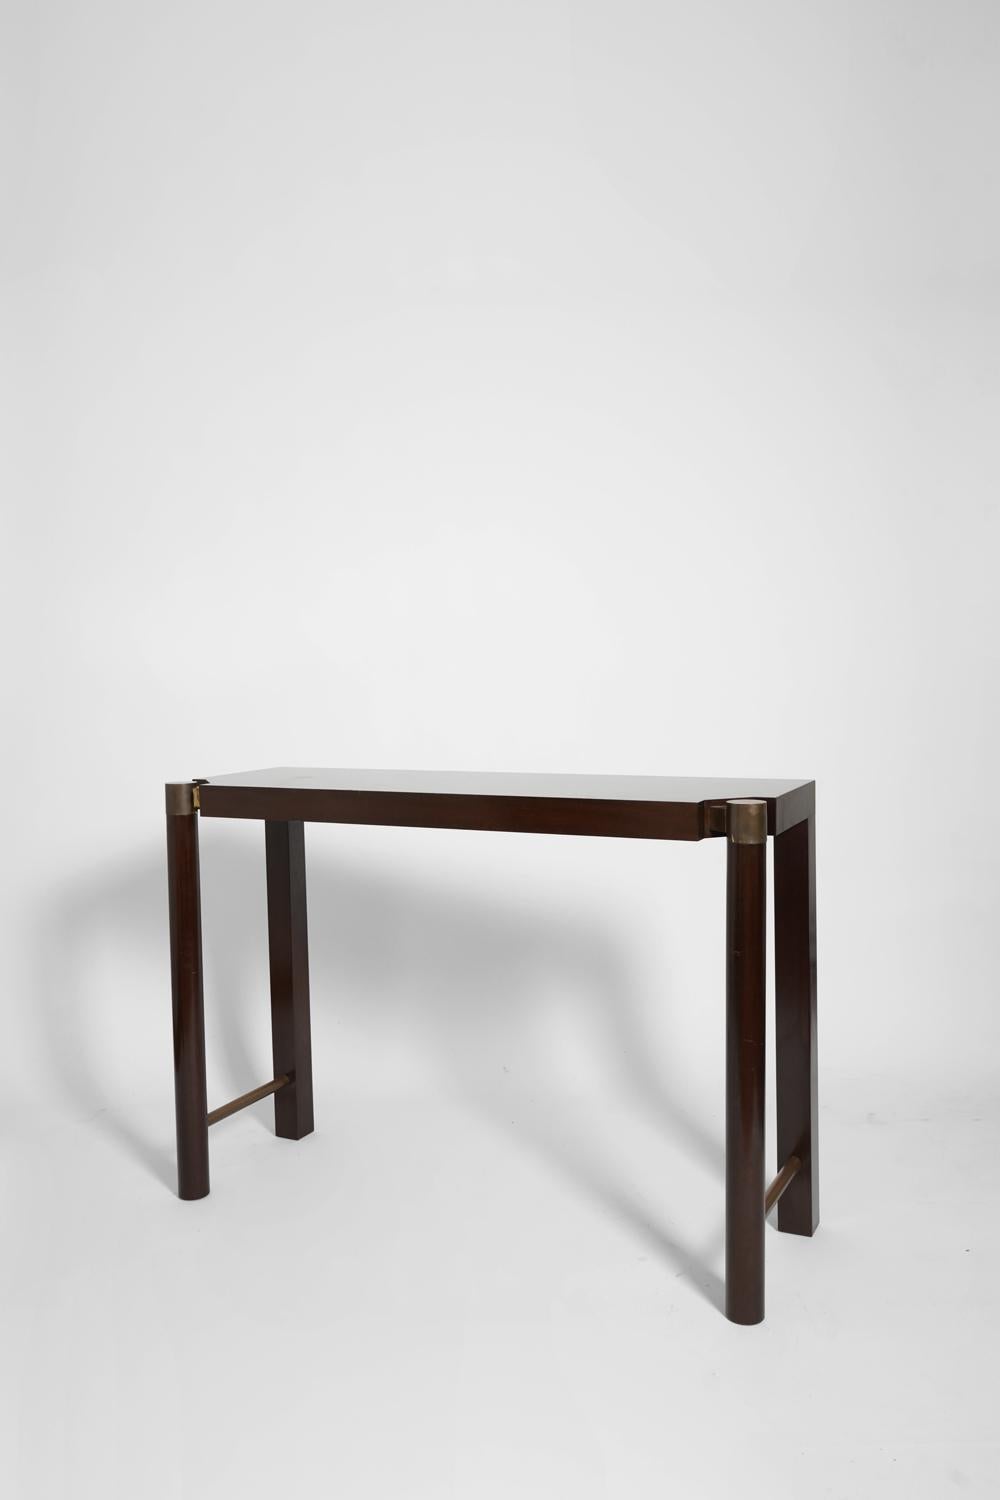 Pair of mahogany and mahogany veneer consoles rectangular shaped top, shaped and smooth front legs with golden metal applications and bracing. Portugal, 1970s.